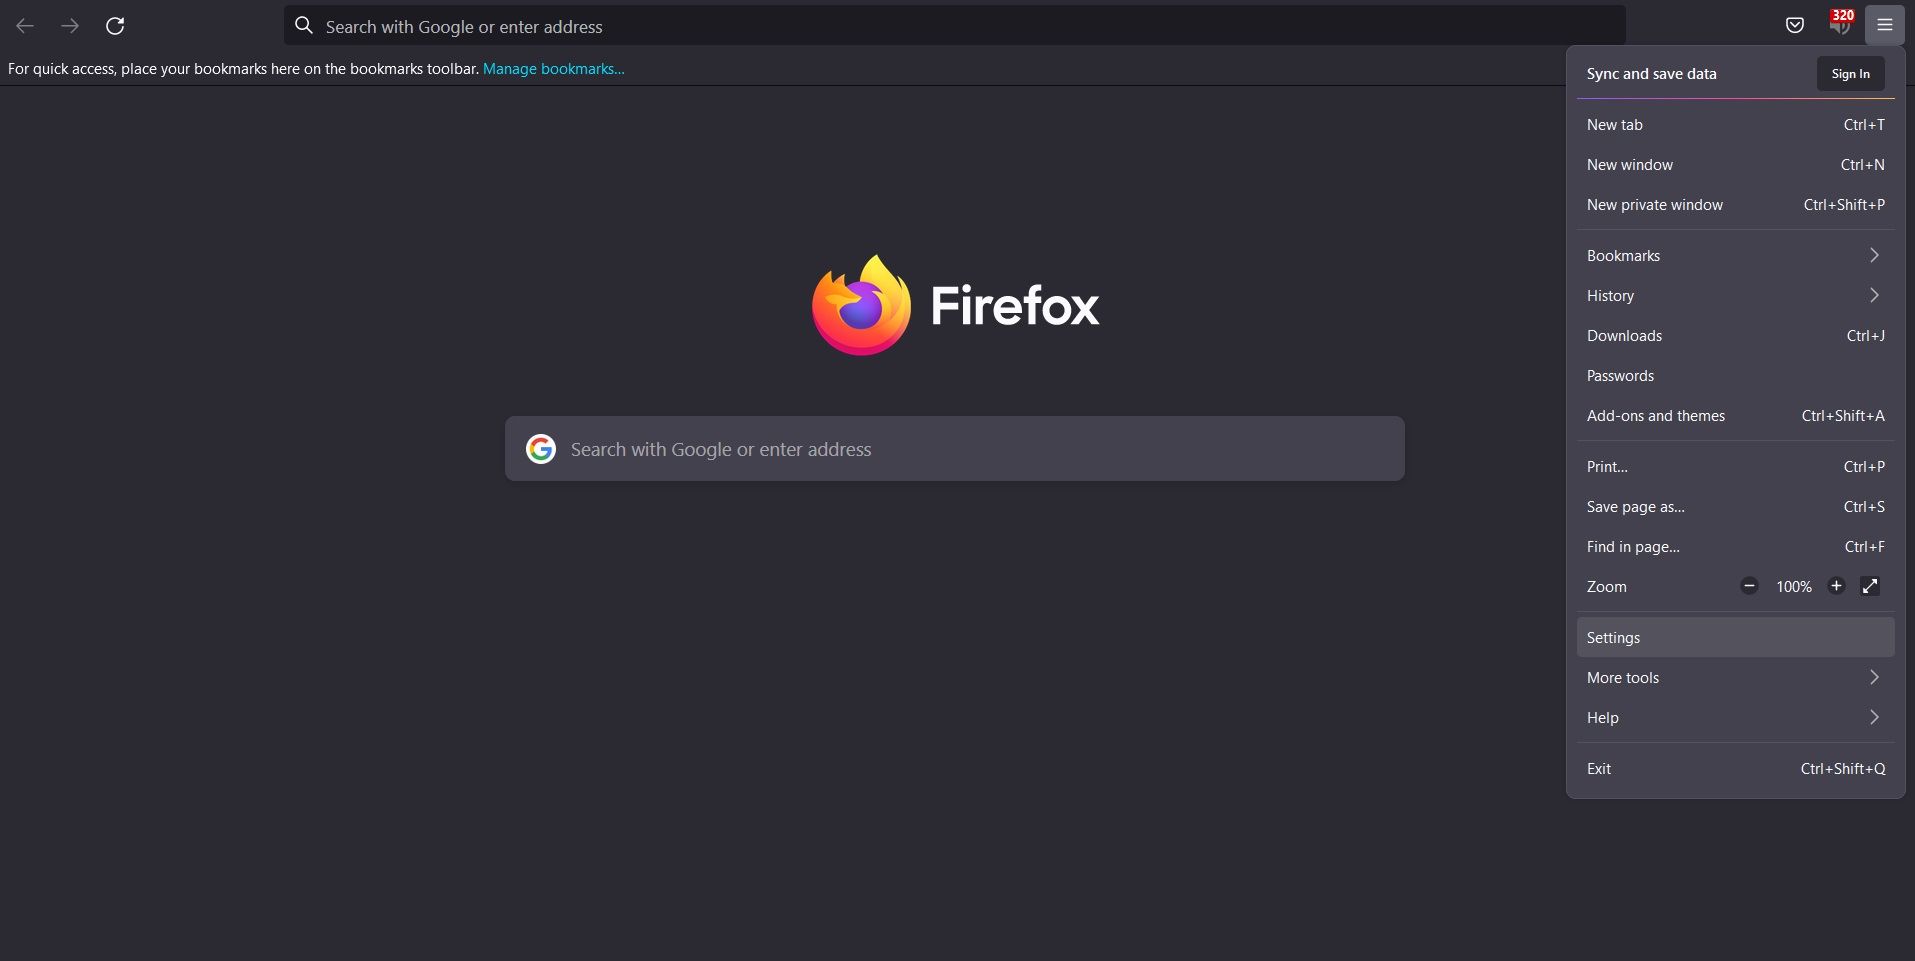 Firefox home page